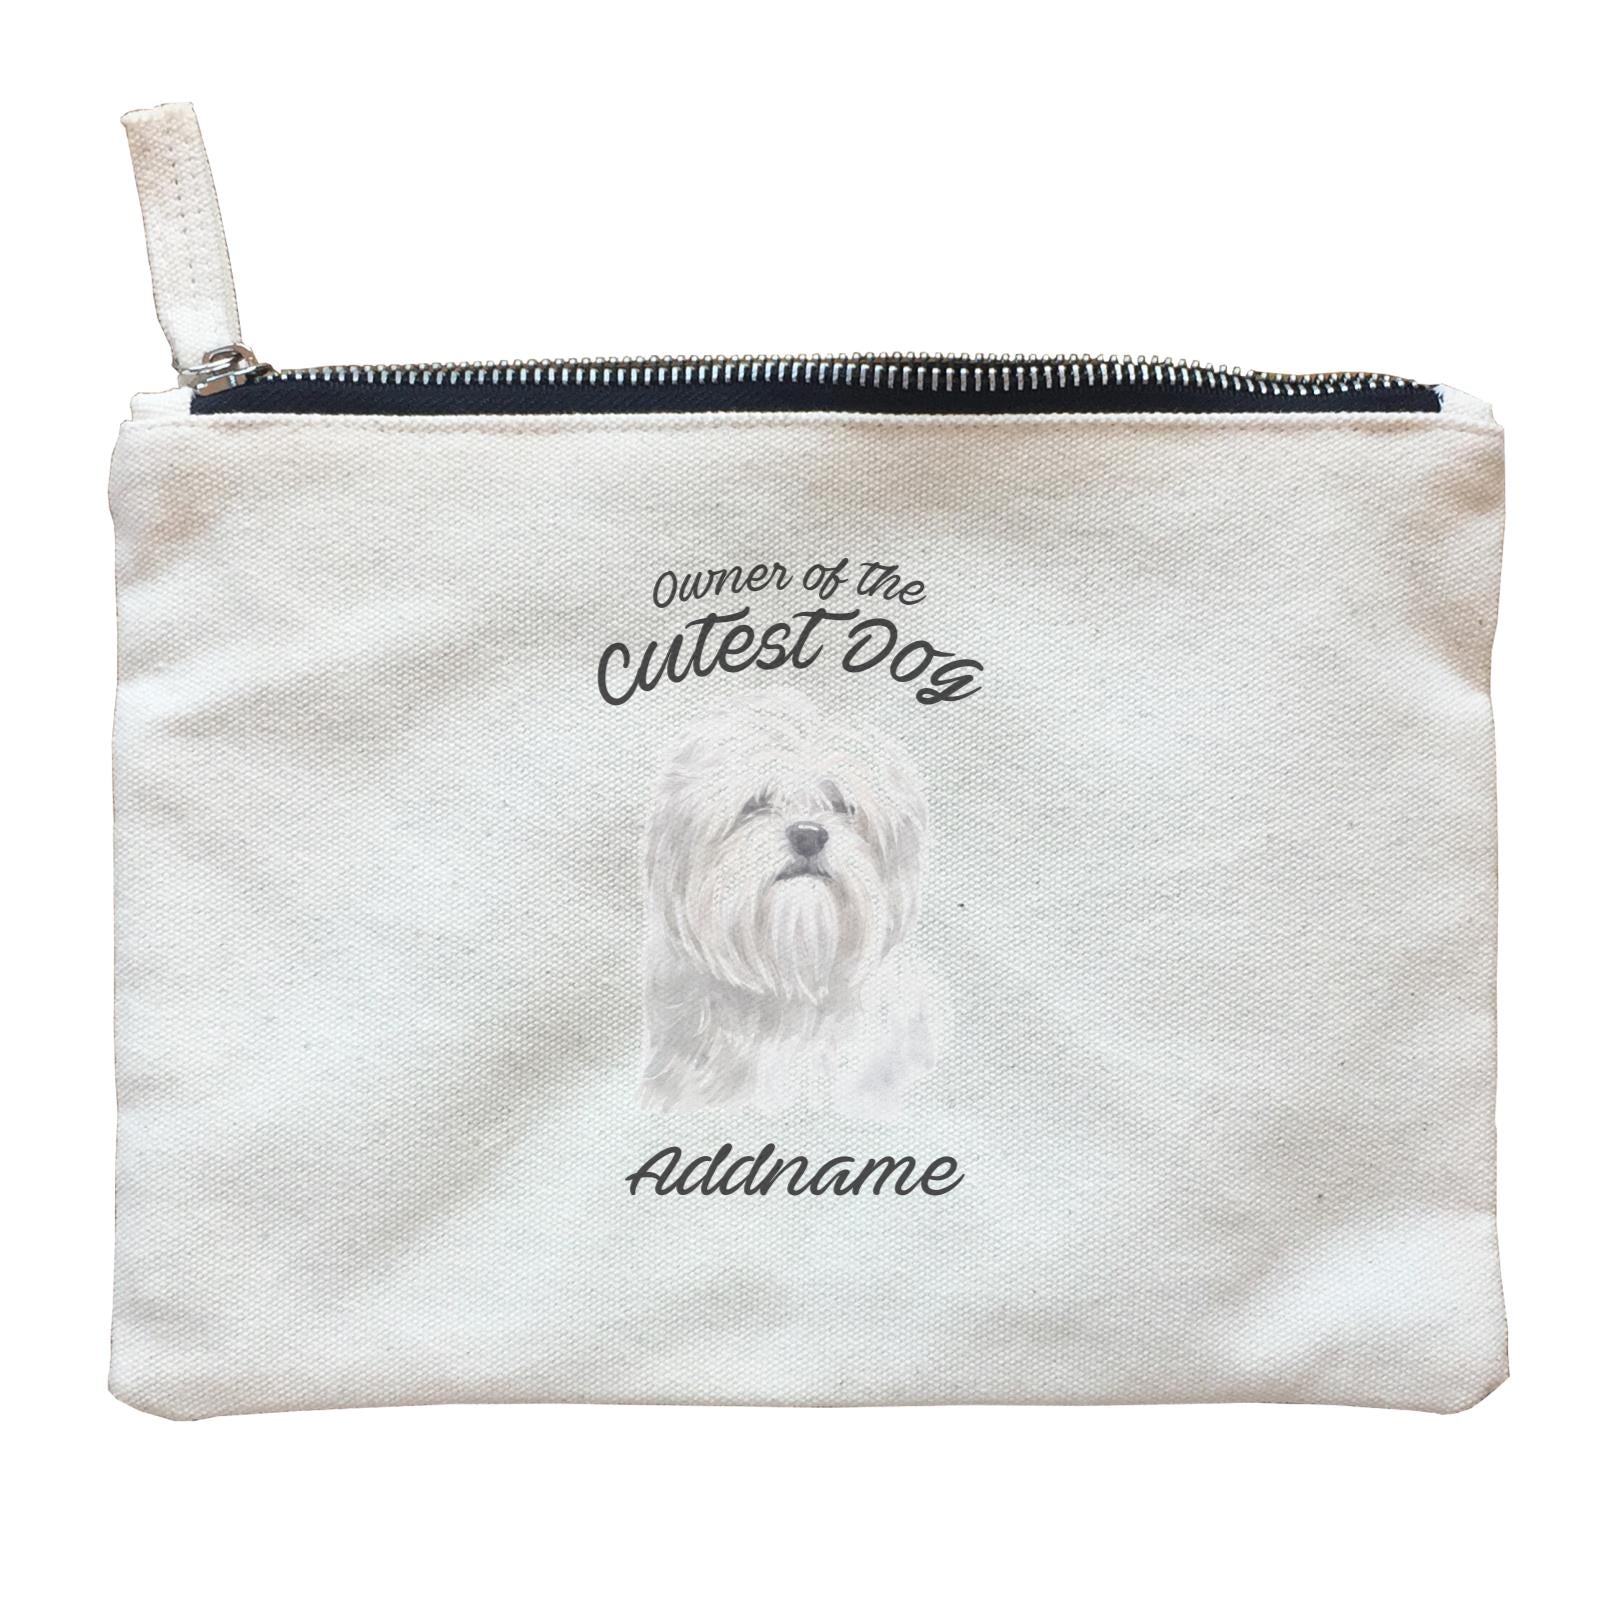 Watercolor Dog Owner Of The Cutest Dog Lhasa Apso Addname Zipper Pouch